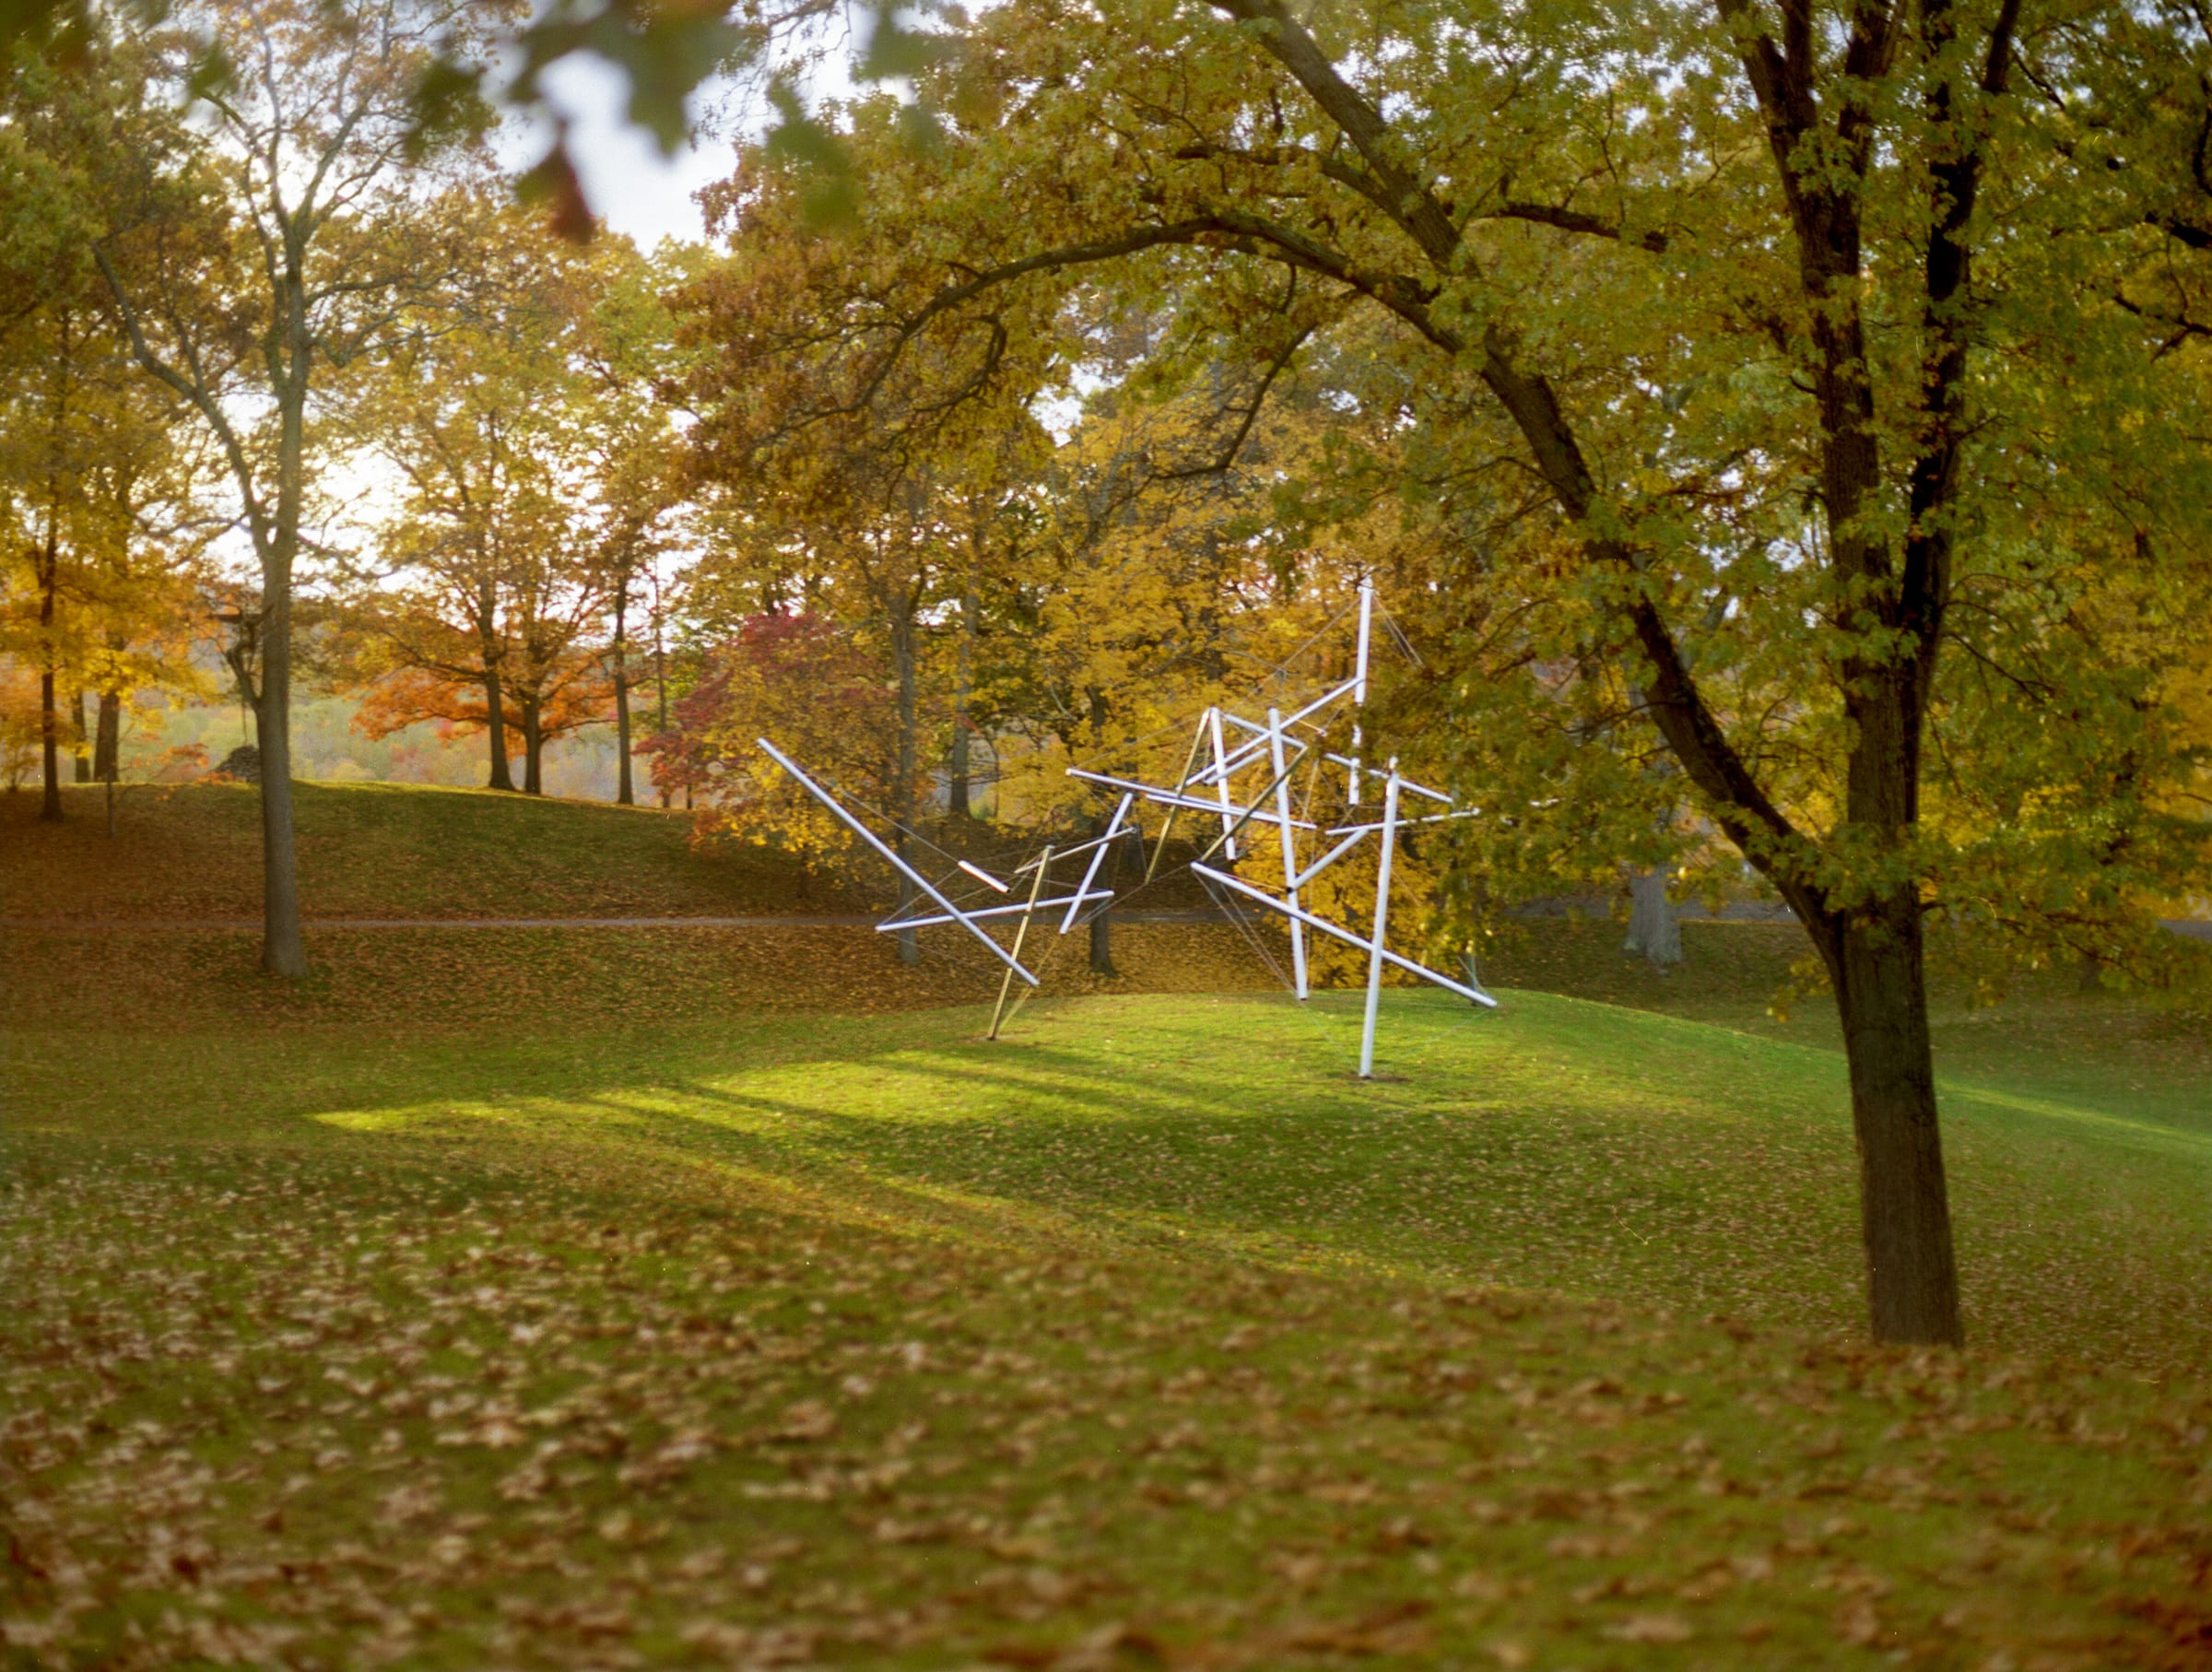 Kenneth Snelson's work Free Ride Home (1974) at Storm King Art Center in  New Windsor, NY. Photo by Tonje Thilesen for Art Basel.